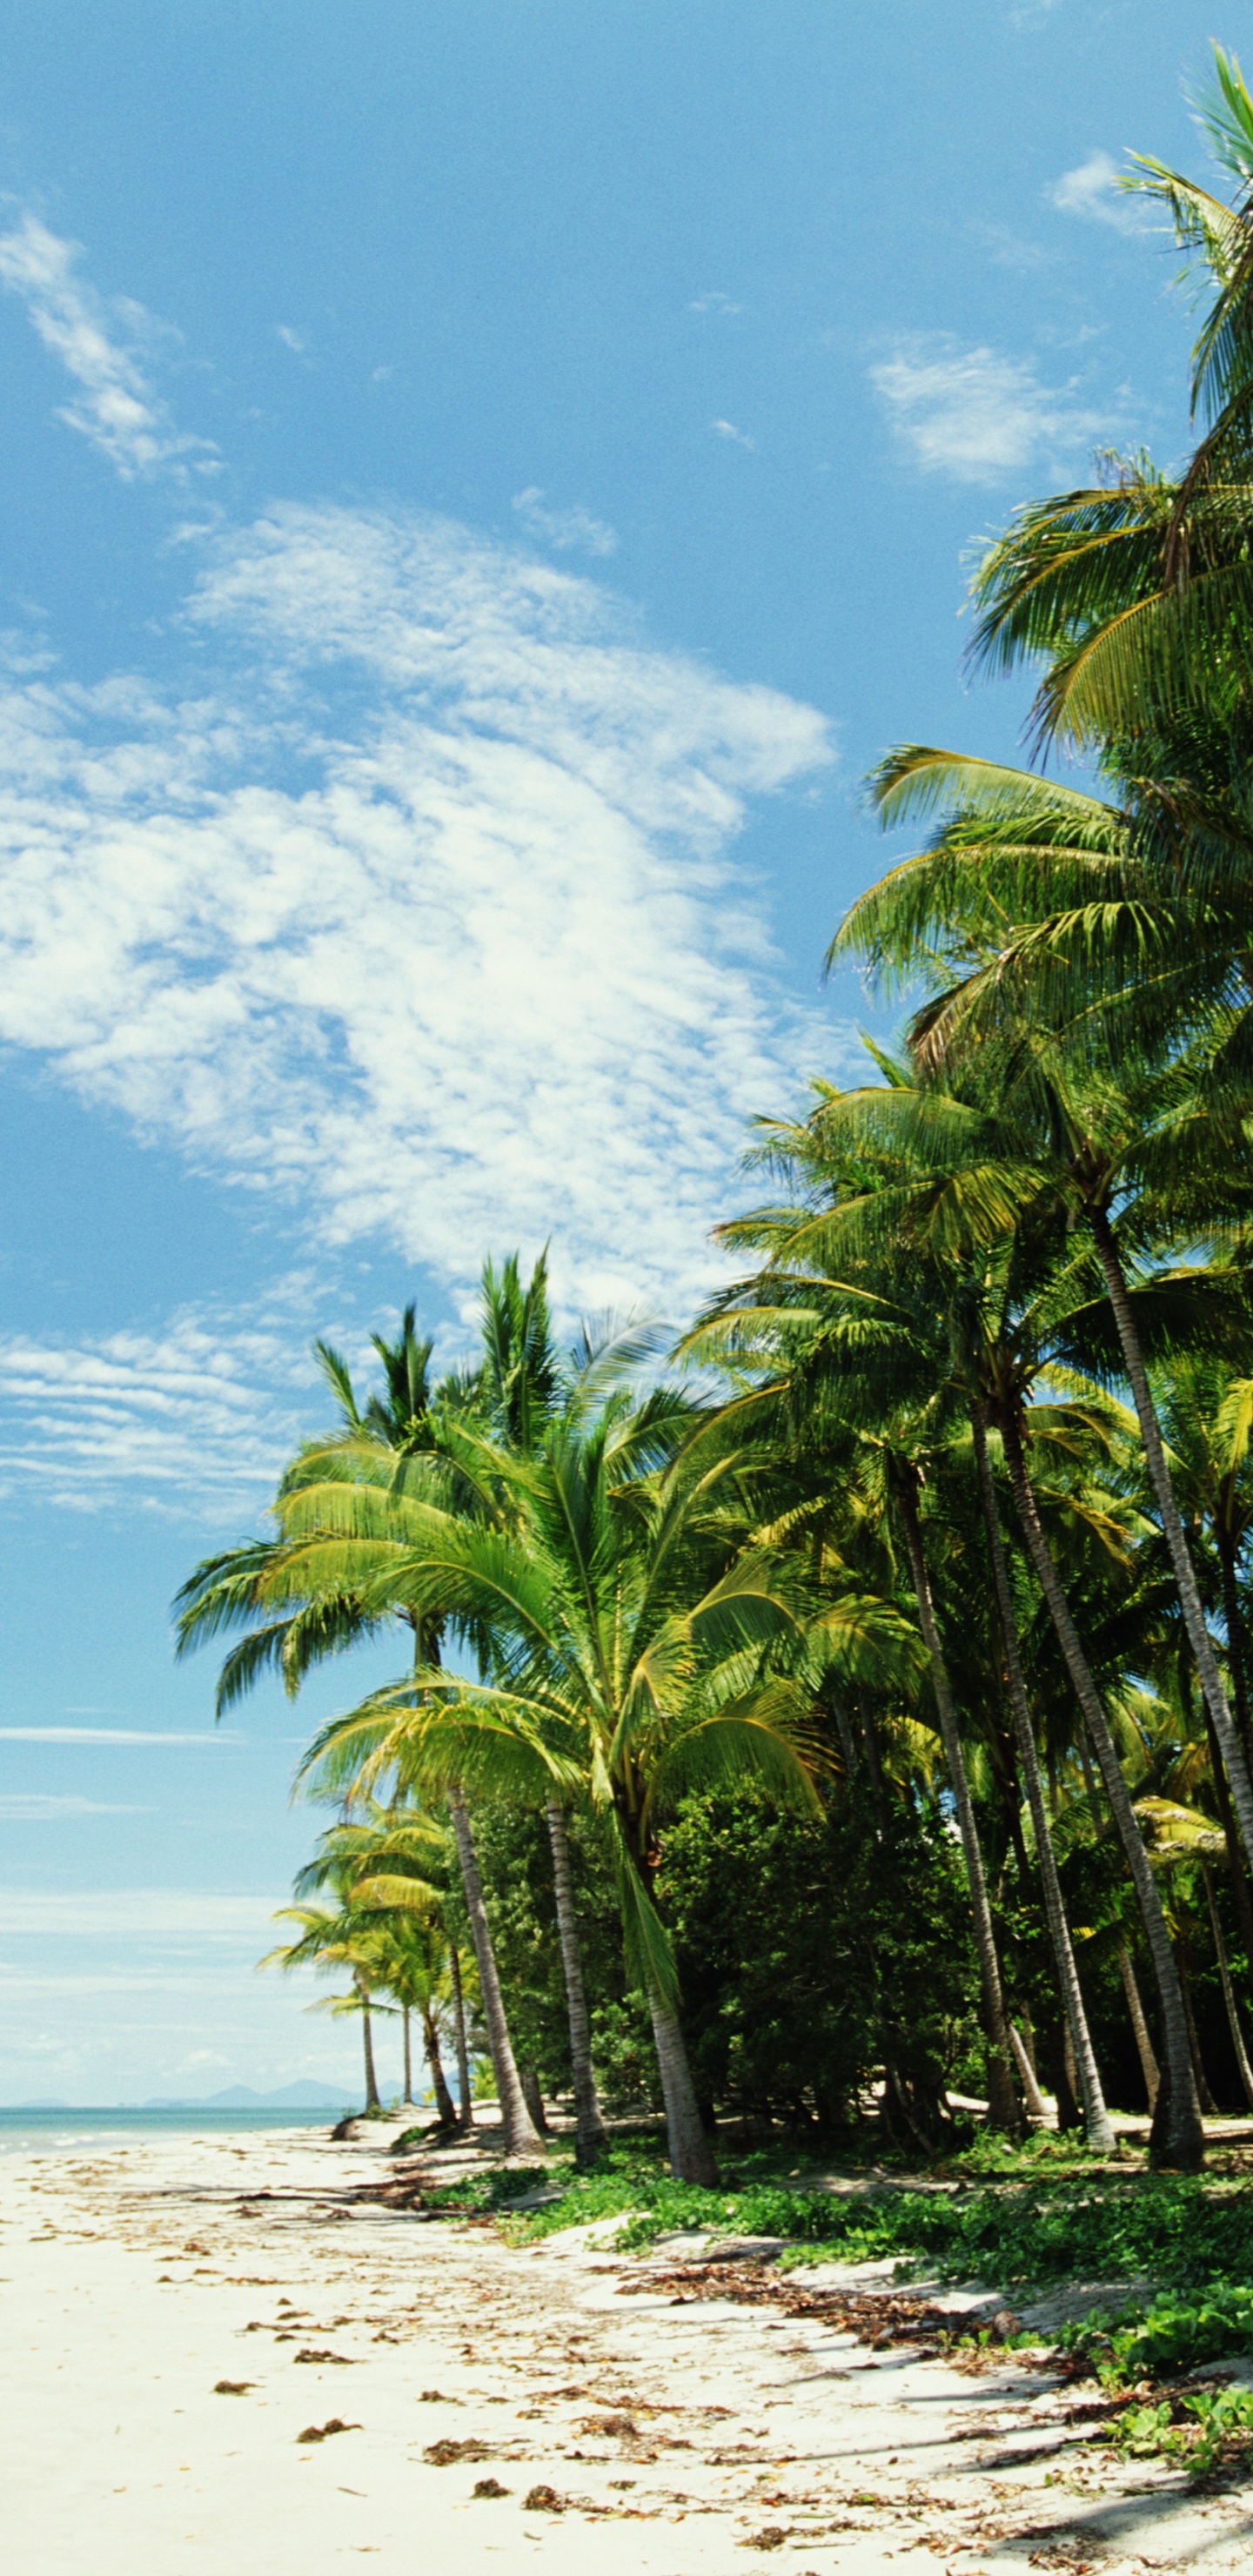 Green Palm Trees on White Sand Beach During Daytime. Wallpaper in 1440x2960 Resolution